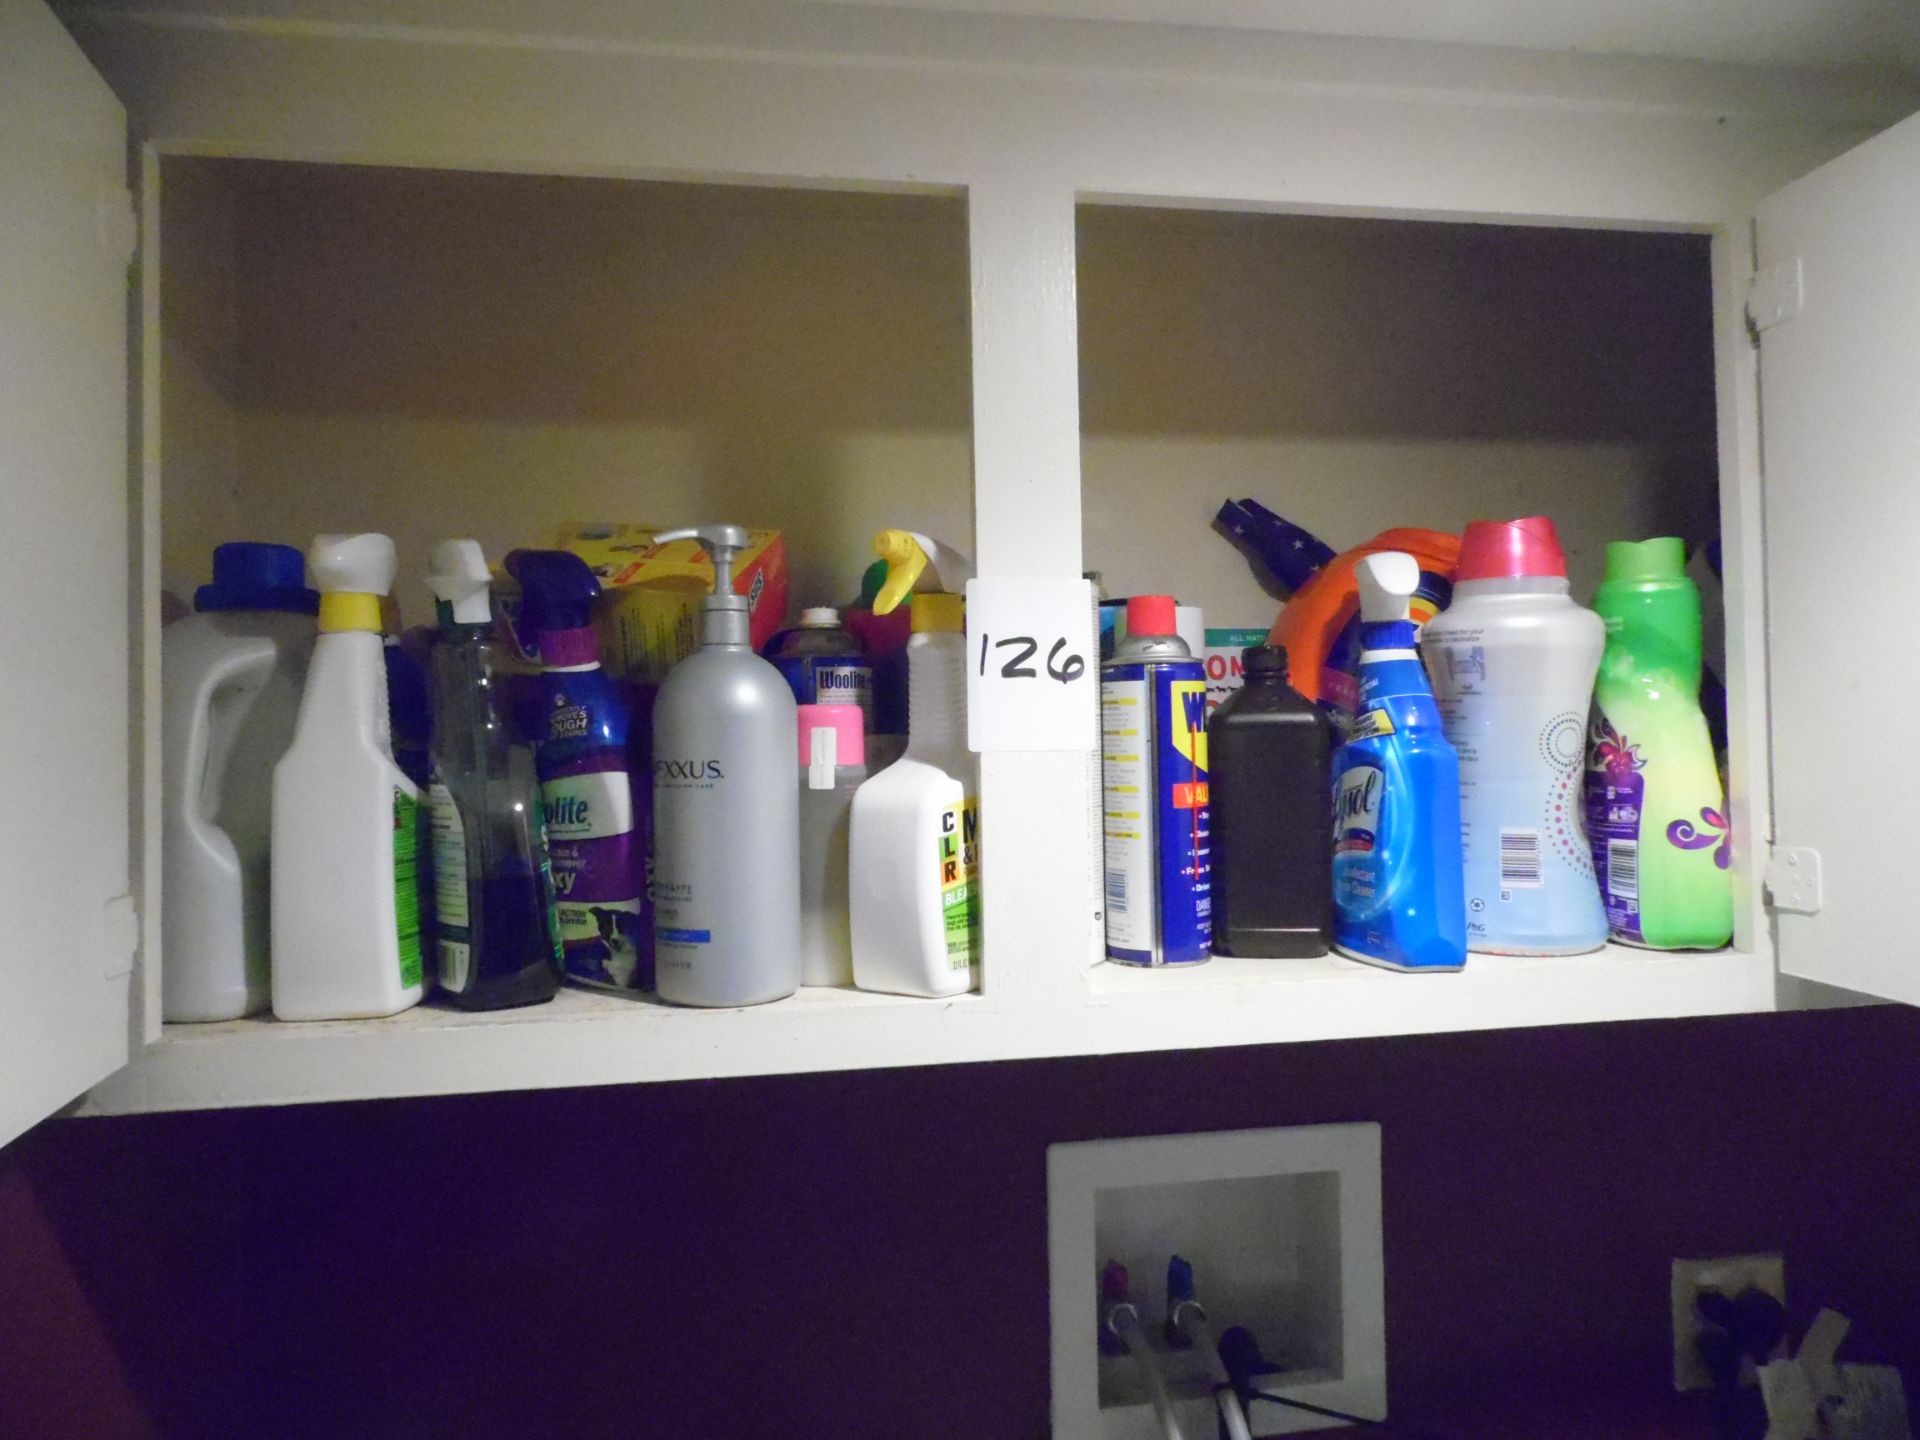 ASSORTED CLEANERS / DETERGENTS (IN CABINET)